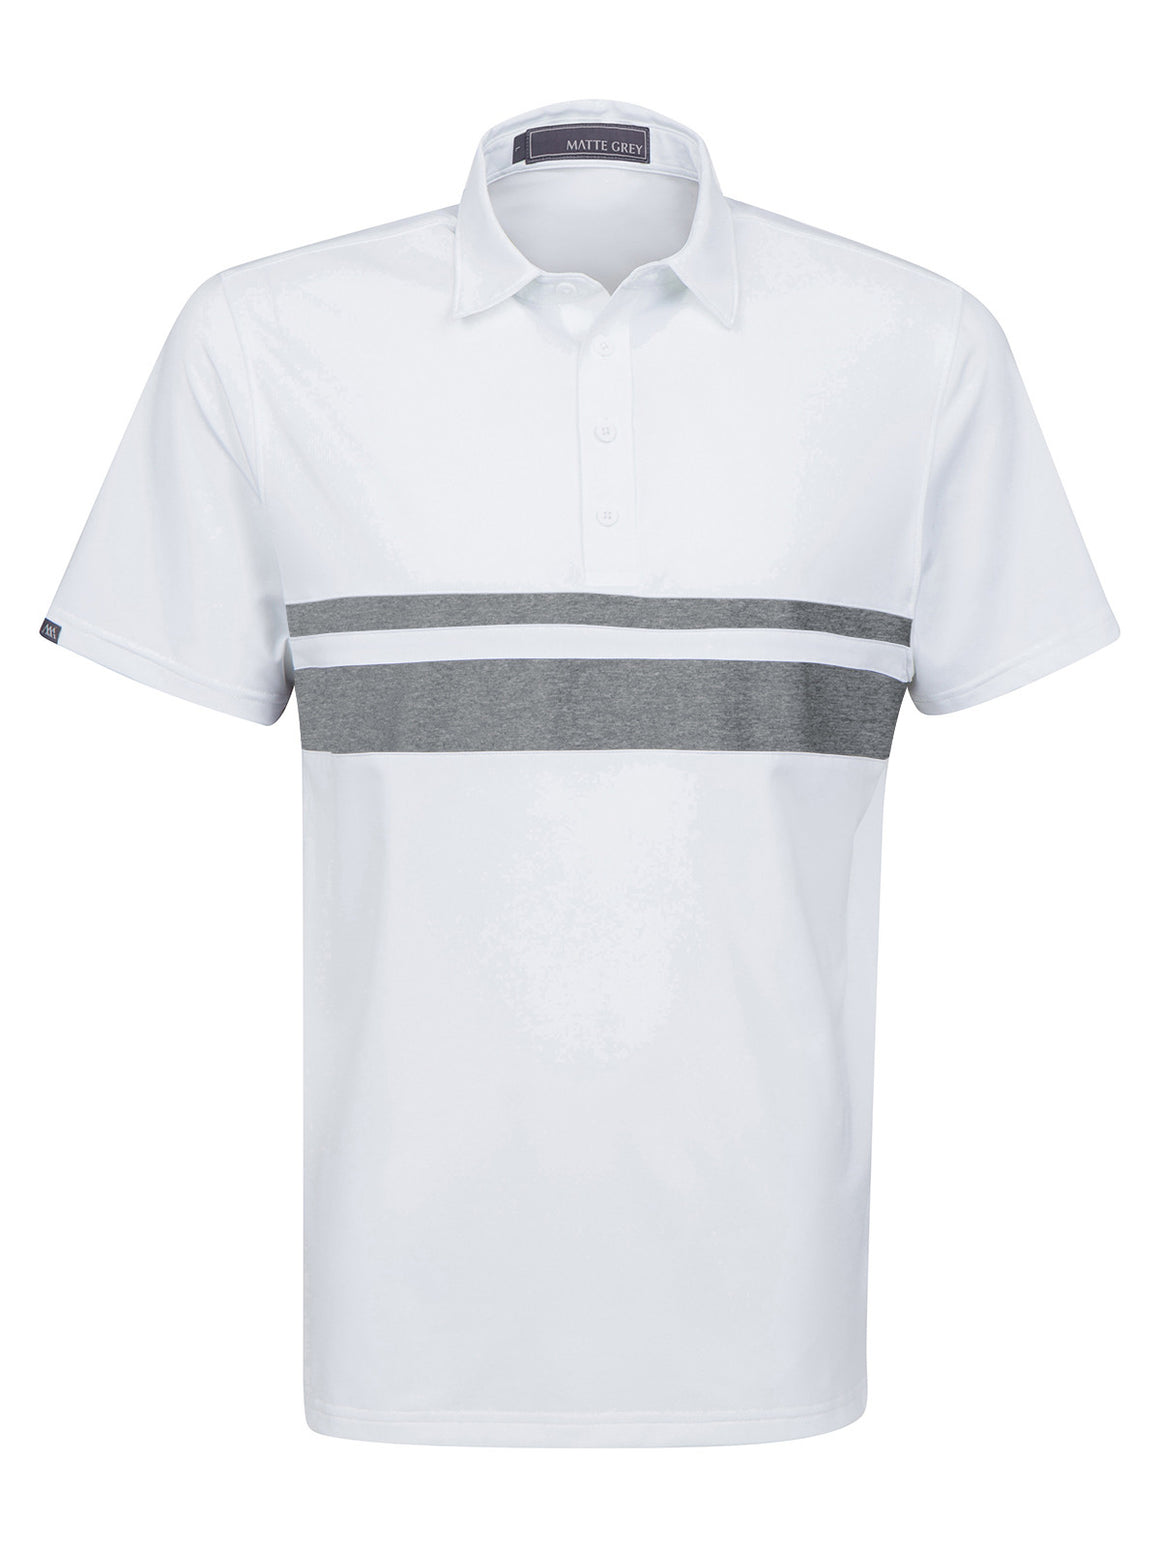 Anders - White (Charcoal Heather)